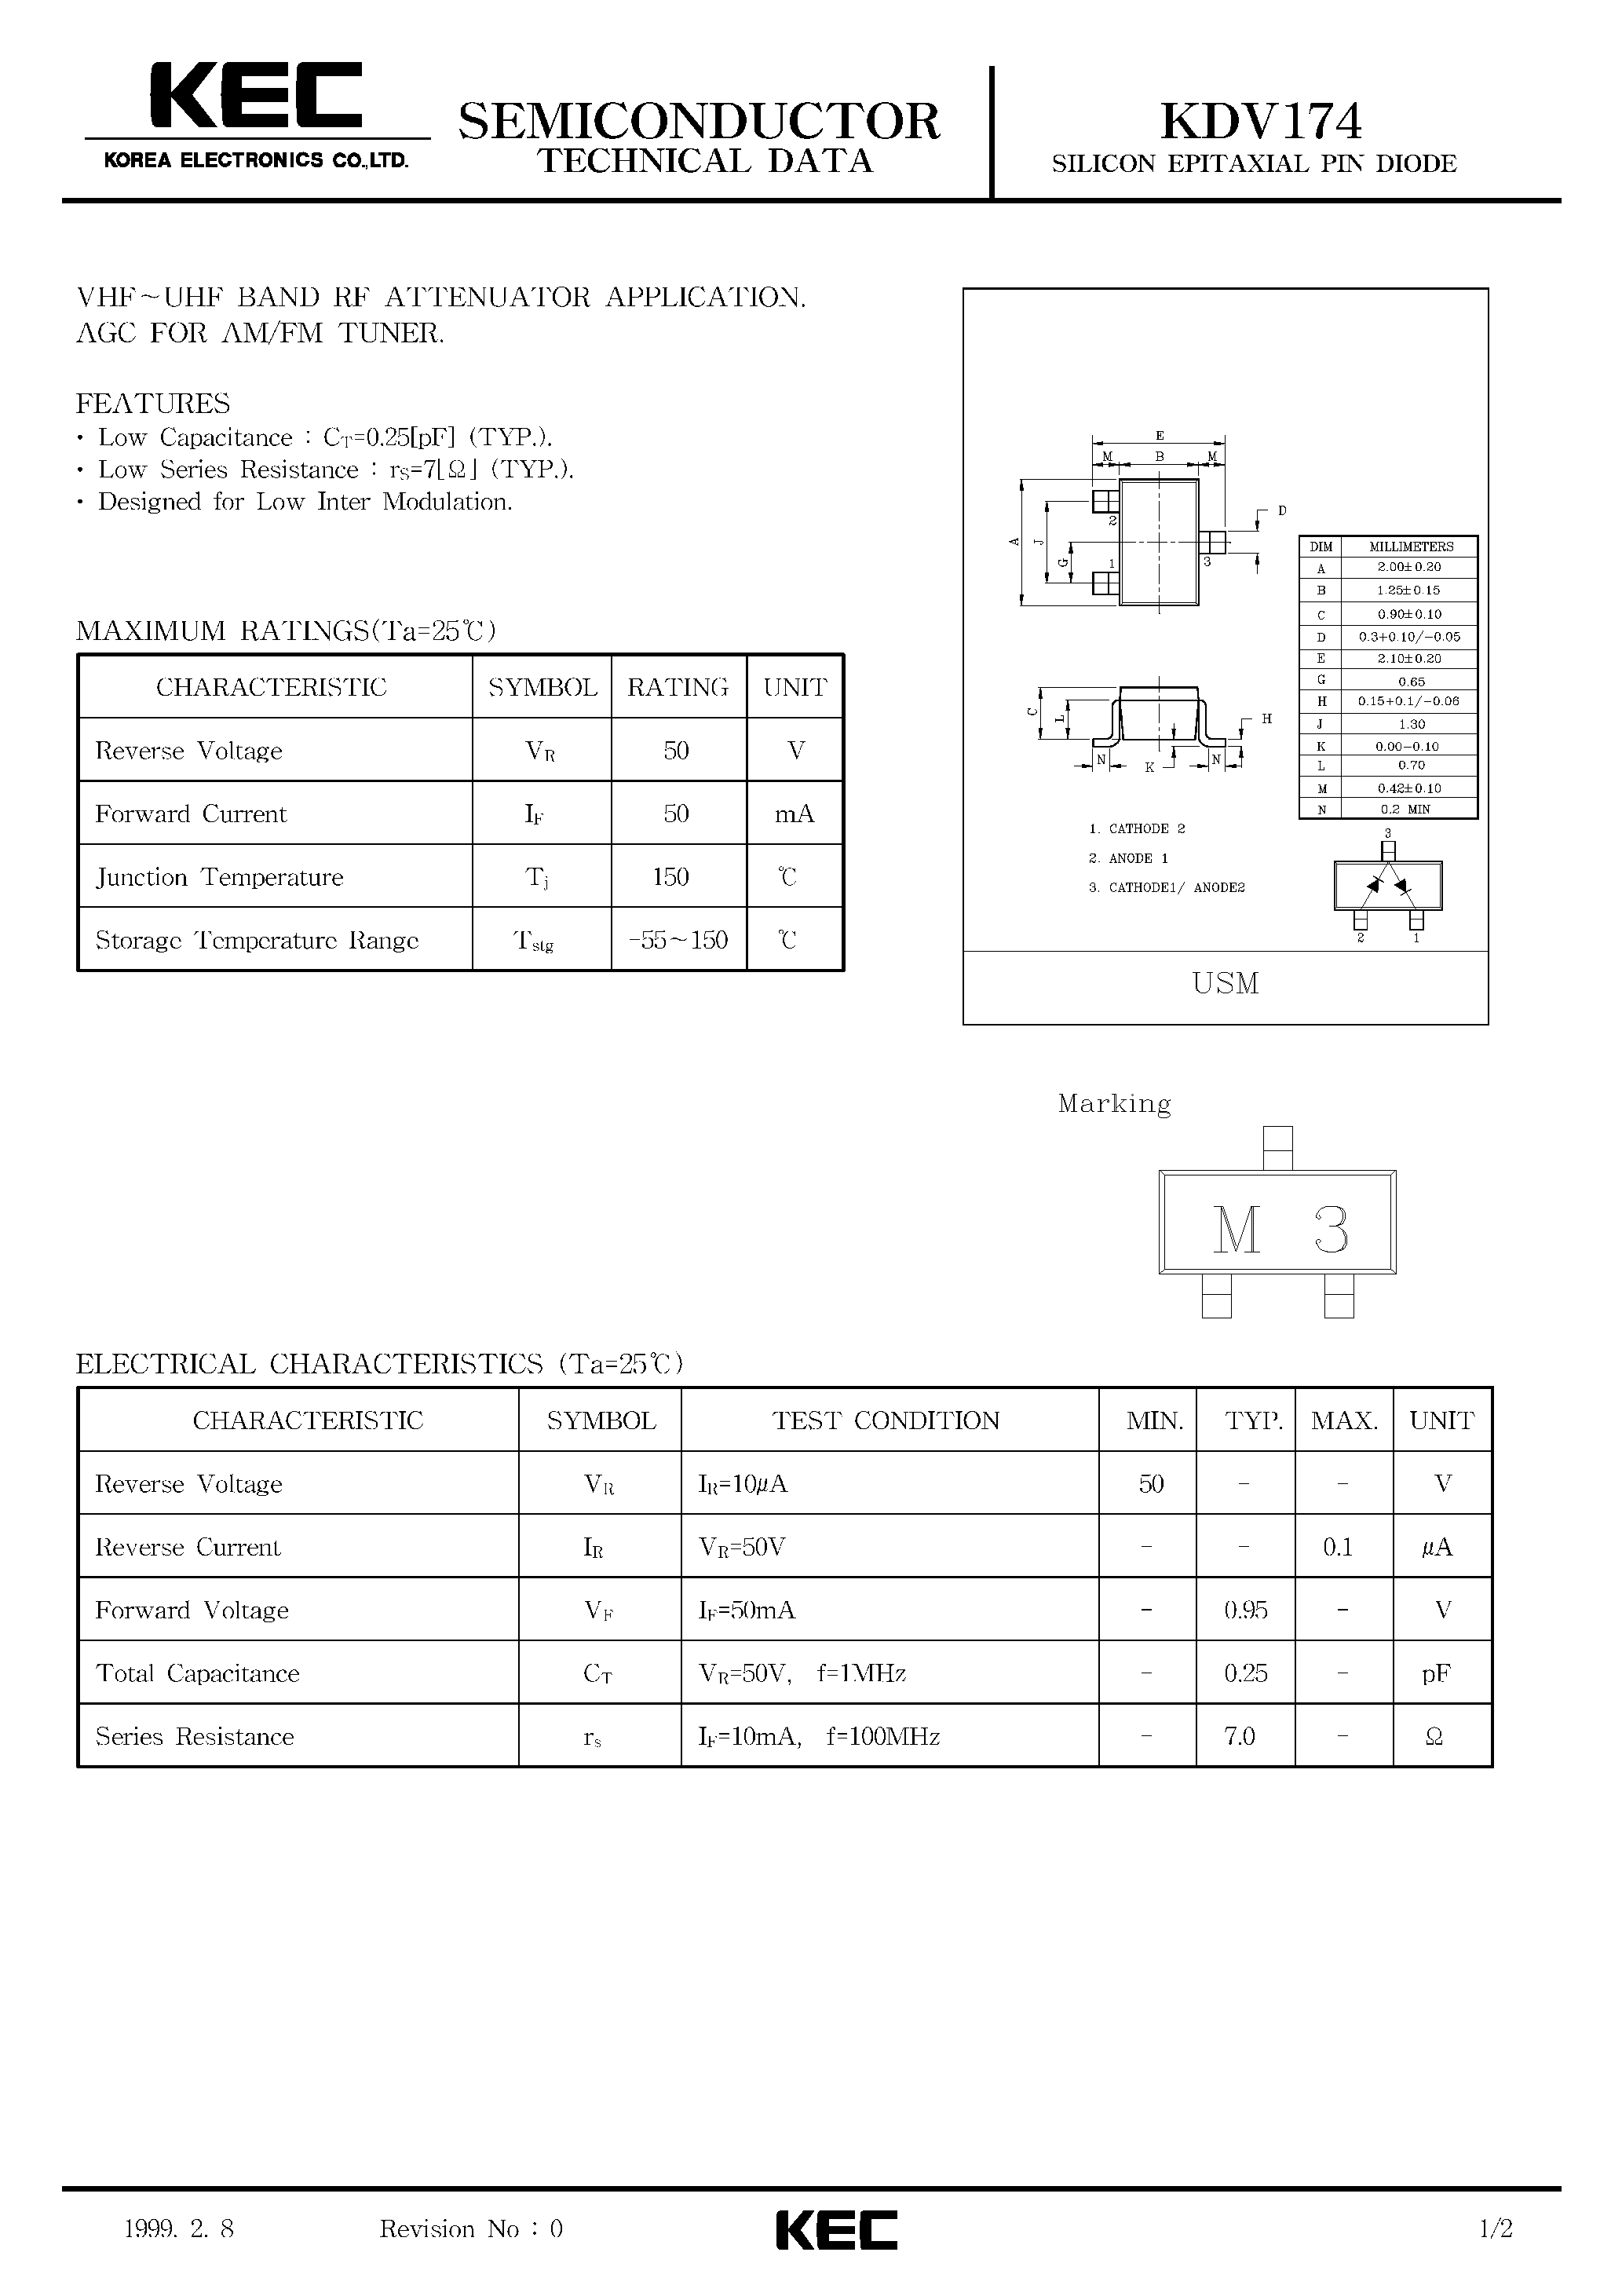 Datasheet KDV174 - SILICON EPITAXIAL PIN DIODE(VHF-UHF BAND RF ATTENUATOR APPLICATION/ AGC FOR AM/FM TUNER) page 1